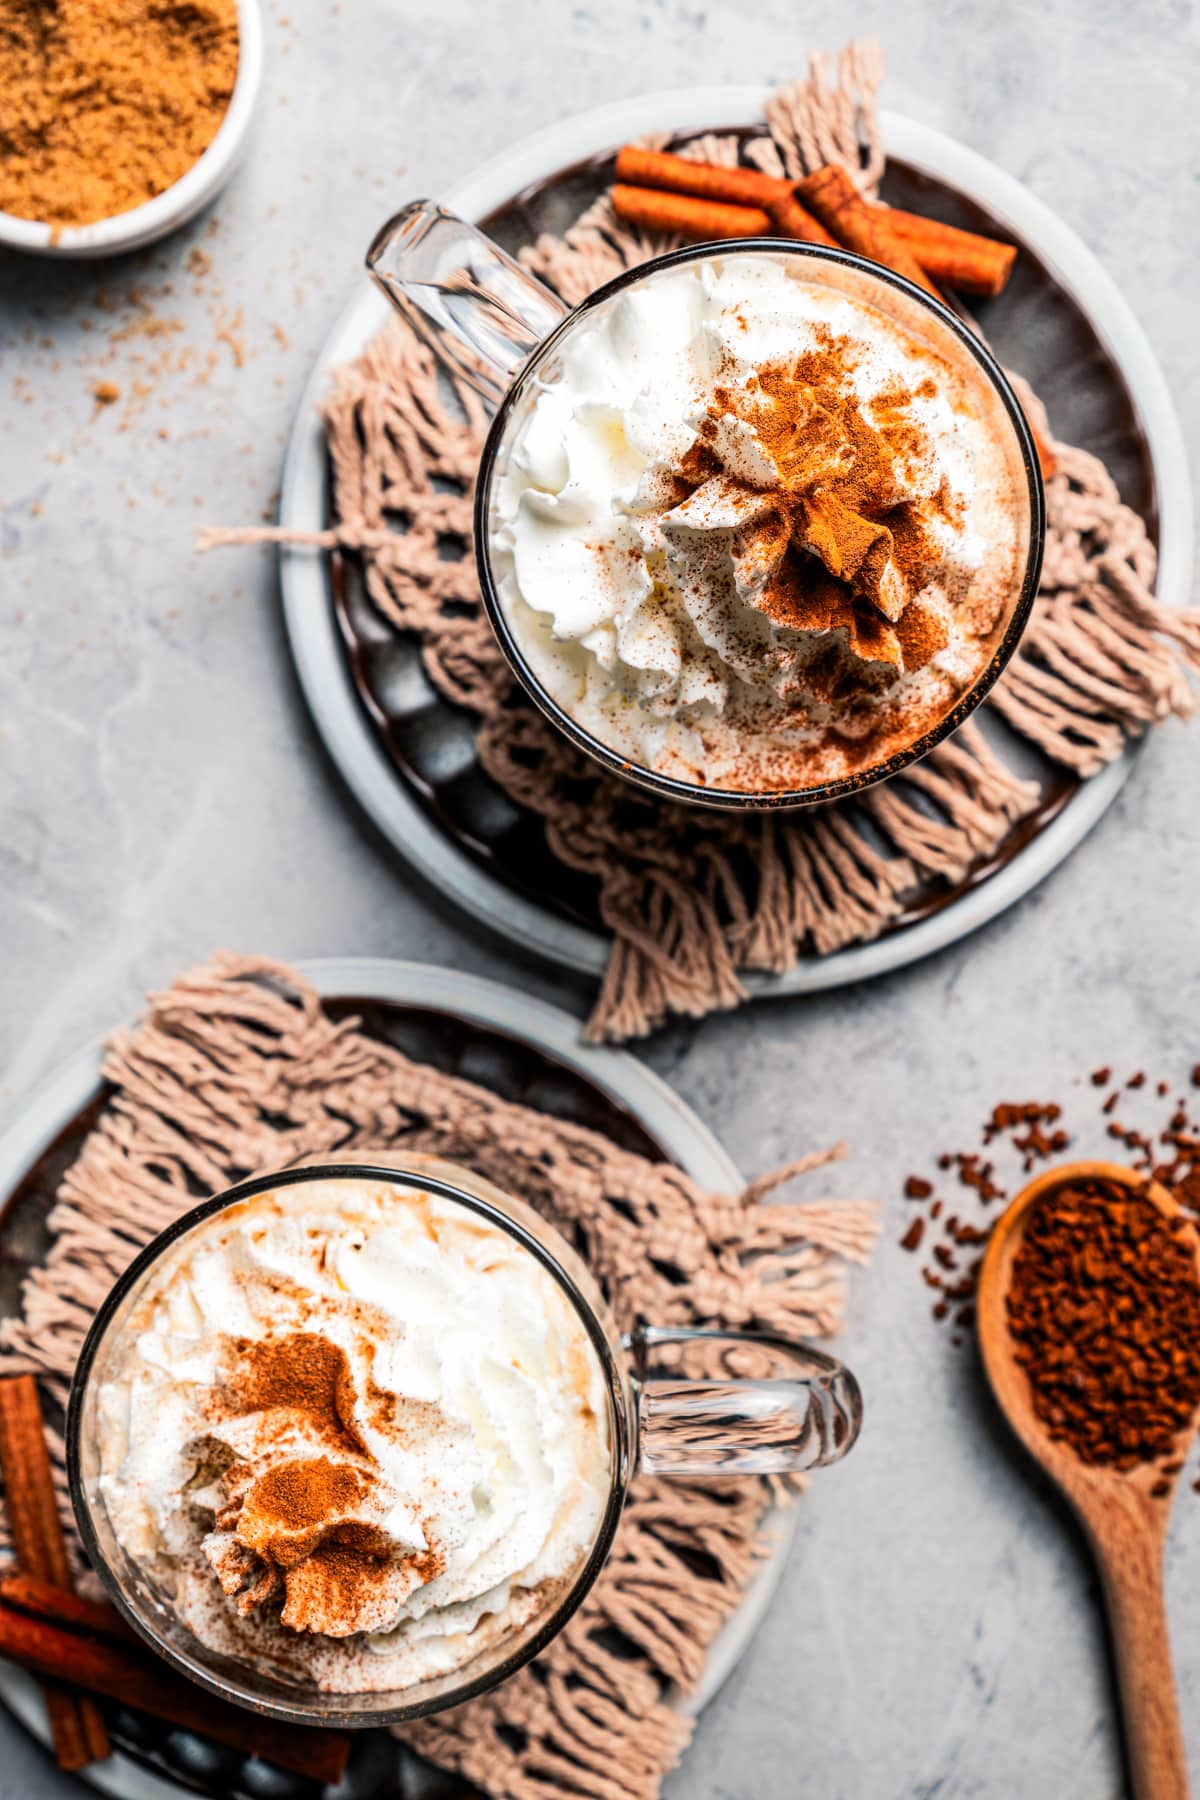 Overhead view of two cinnamon dolce lattes in mugs garnished with whipped cream and dusted with cinnamon.